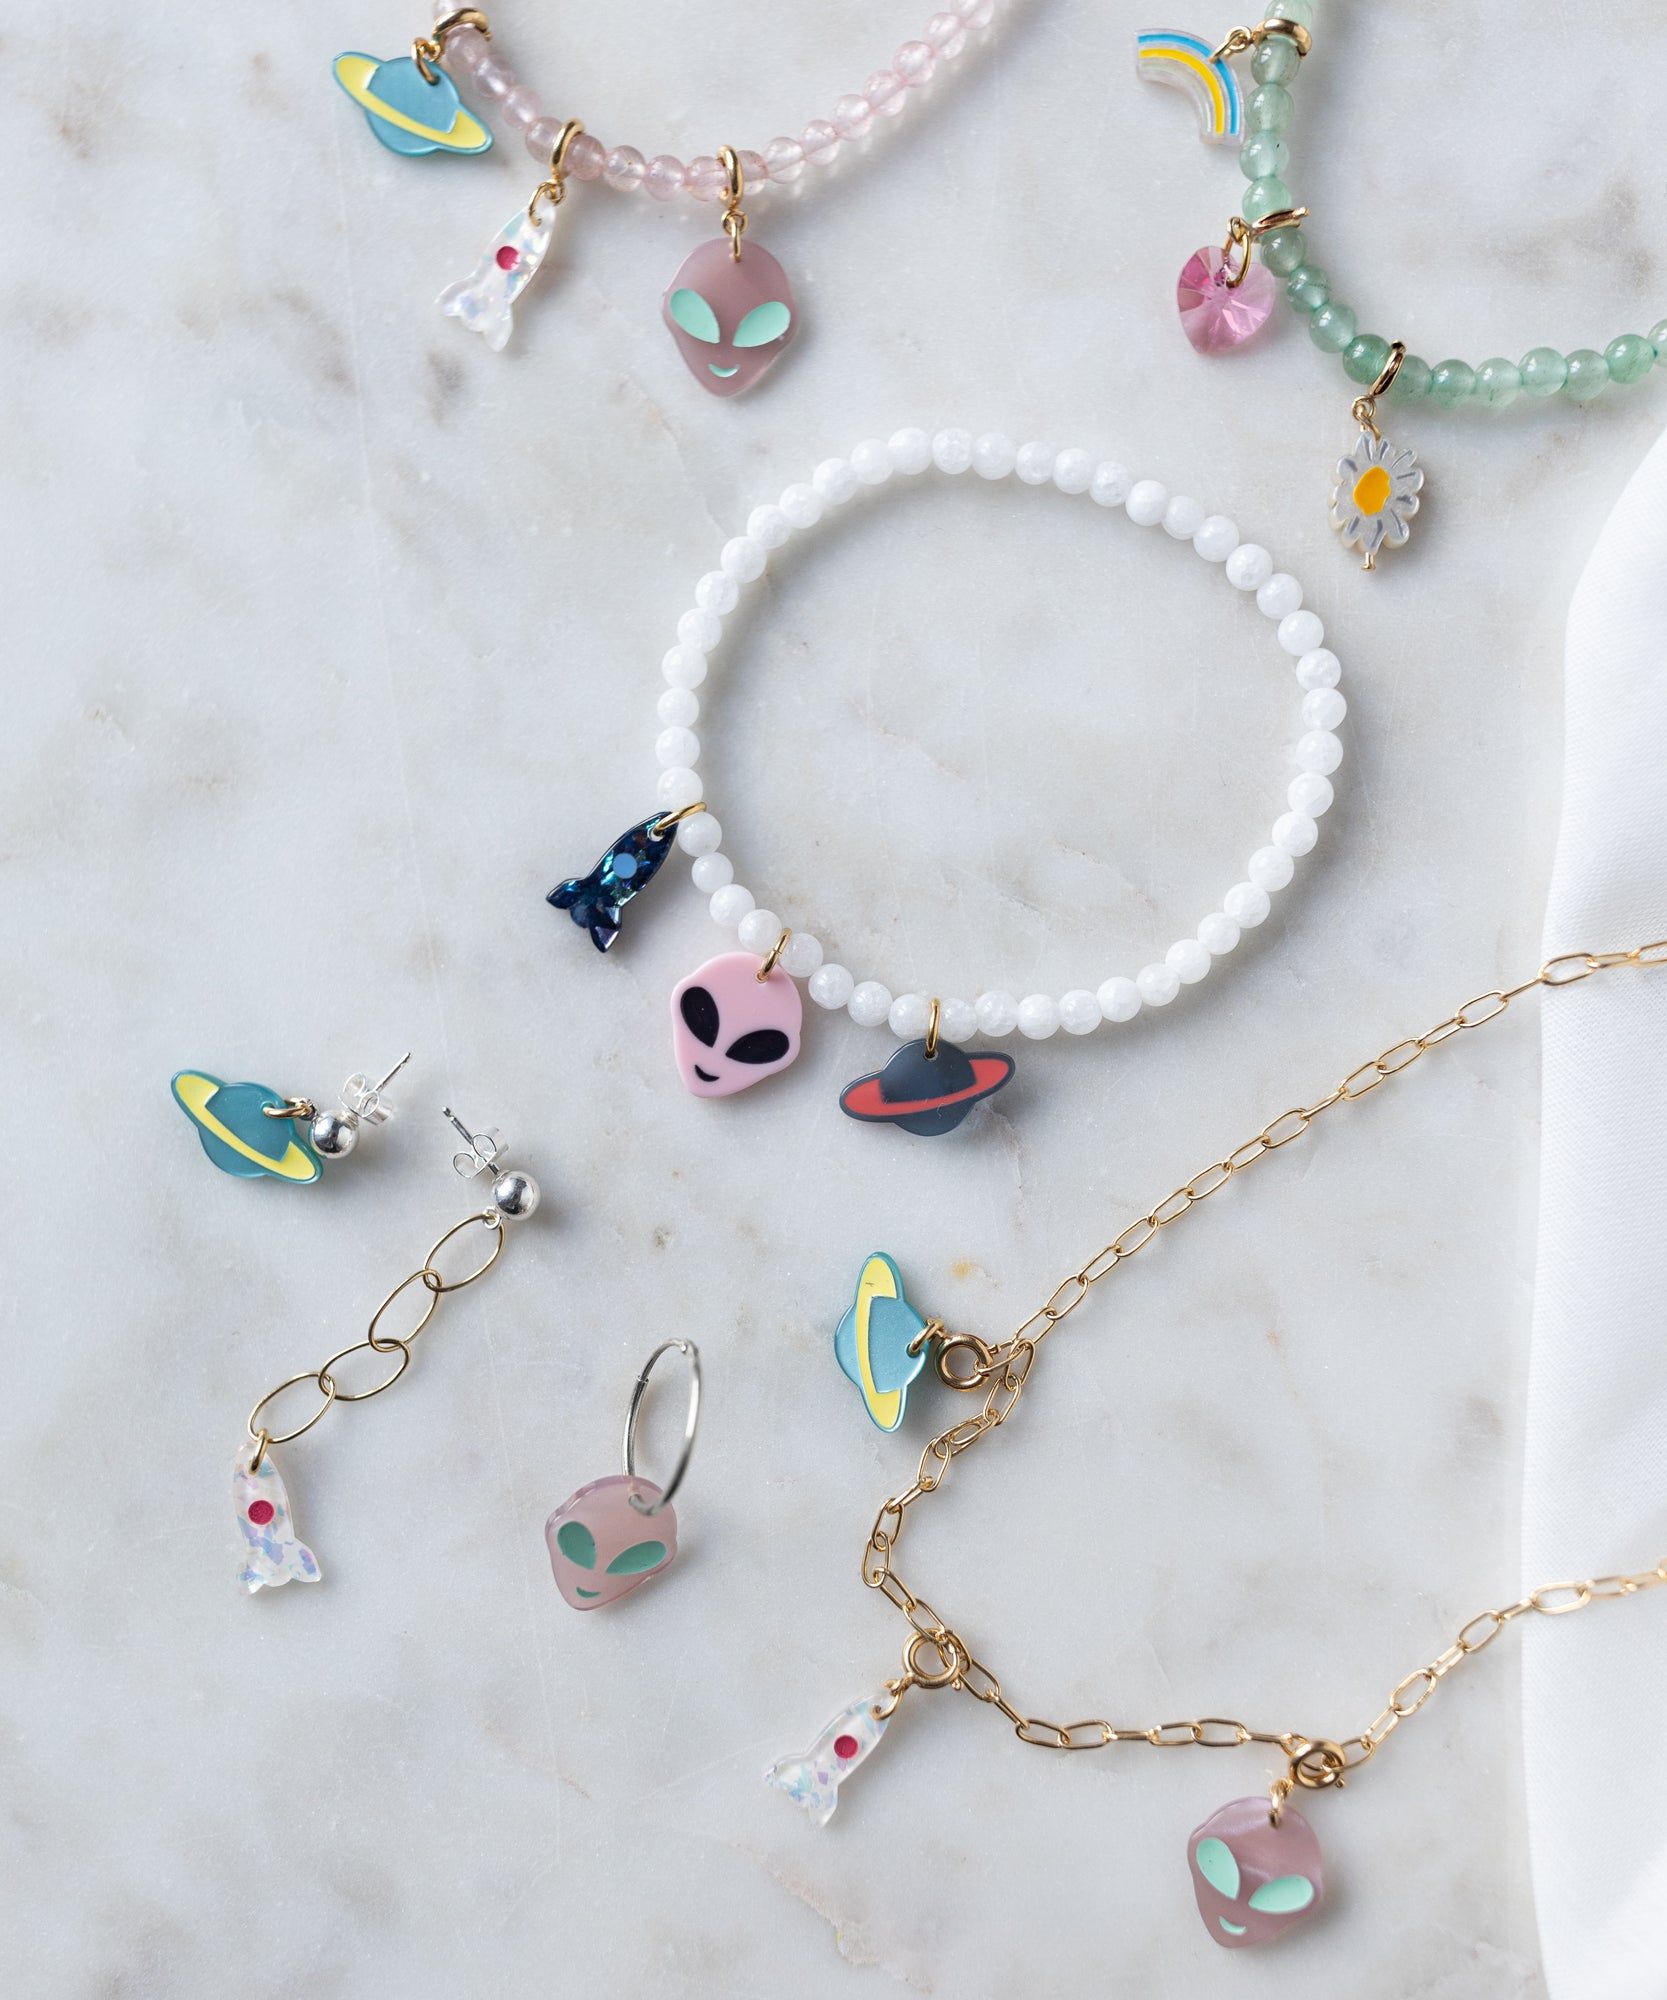 A collection of From Another Mother Rosé Orbit Bracelets and necklaces with aliens on them, inspired by the beauty of rose quartz stones, designed and crafted in Germany by WALD Berlin.